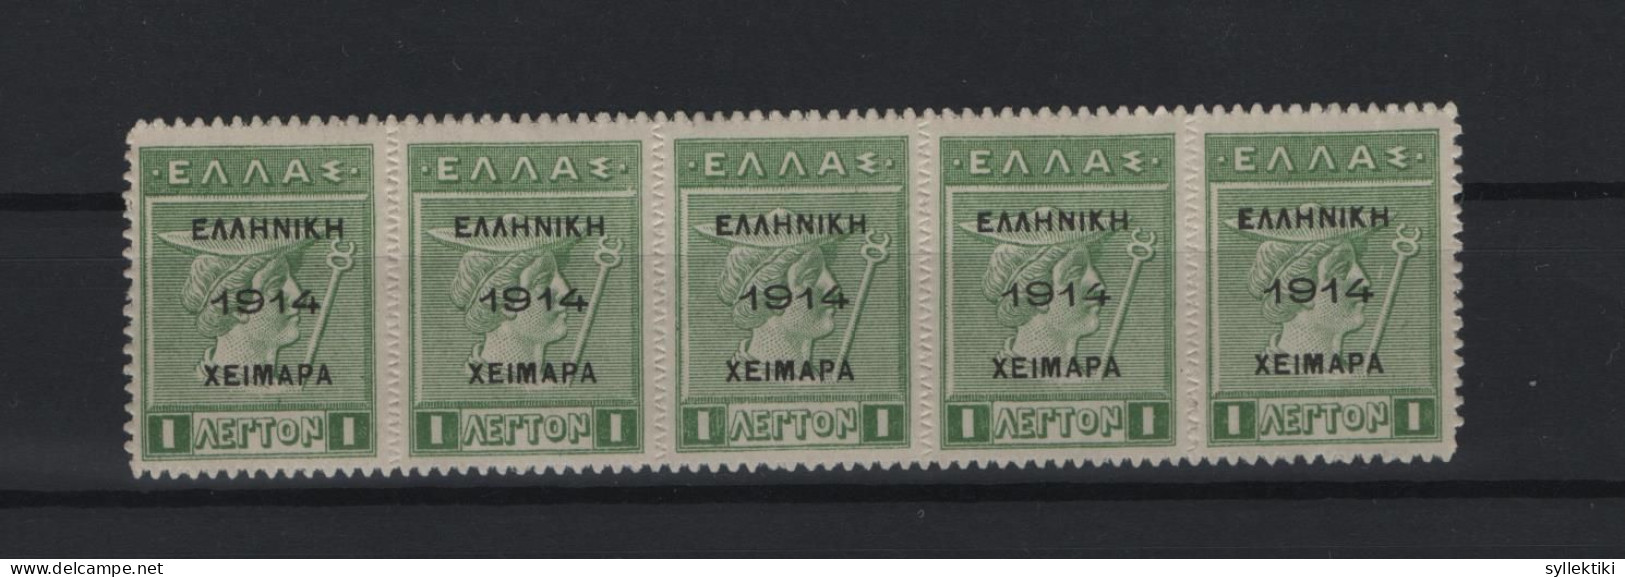 GREECE 1914 CHIMARRA ISSUE 1 LEPTON MNH STAMPS IN STRIP OF 5   HELLAS No 68  AND VALUE EURO 1000.00 - Epirus & Albanie